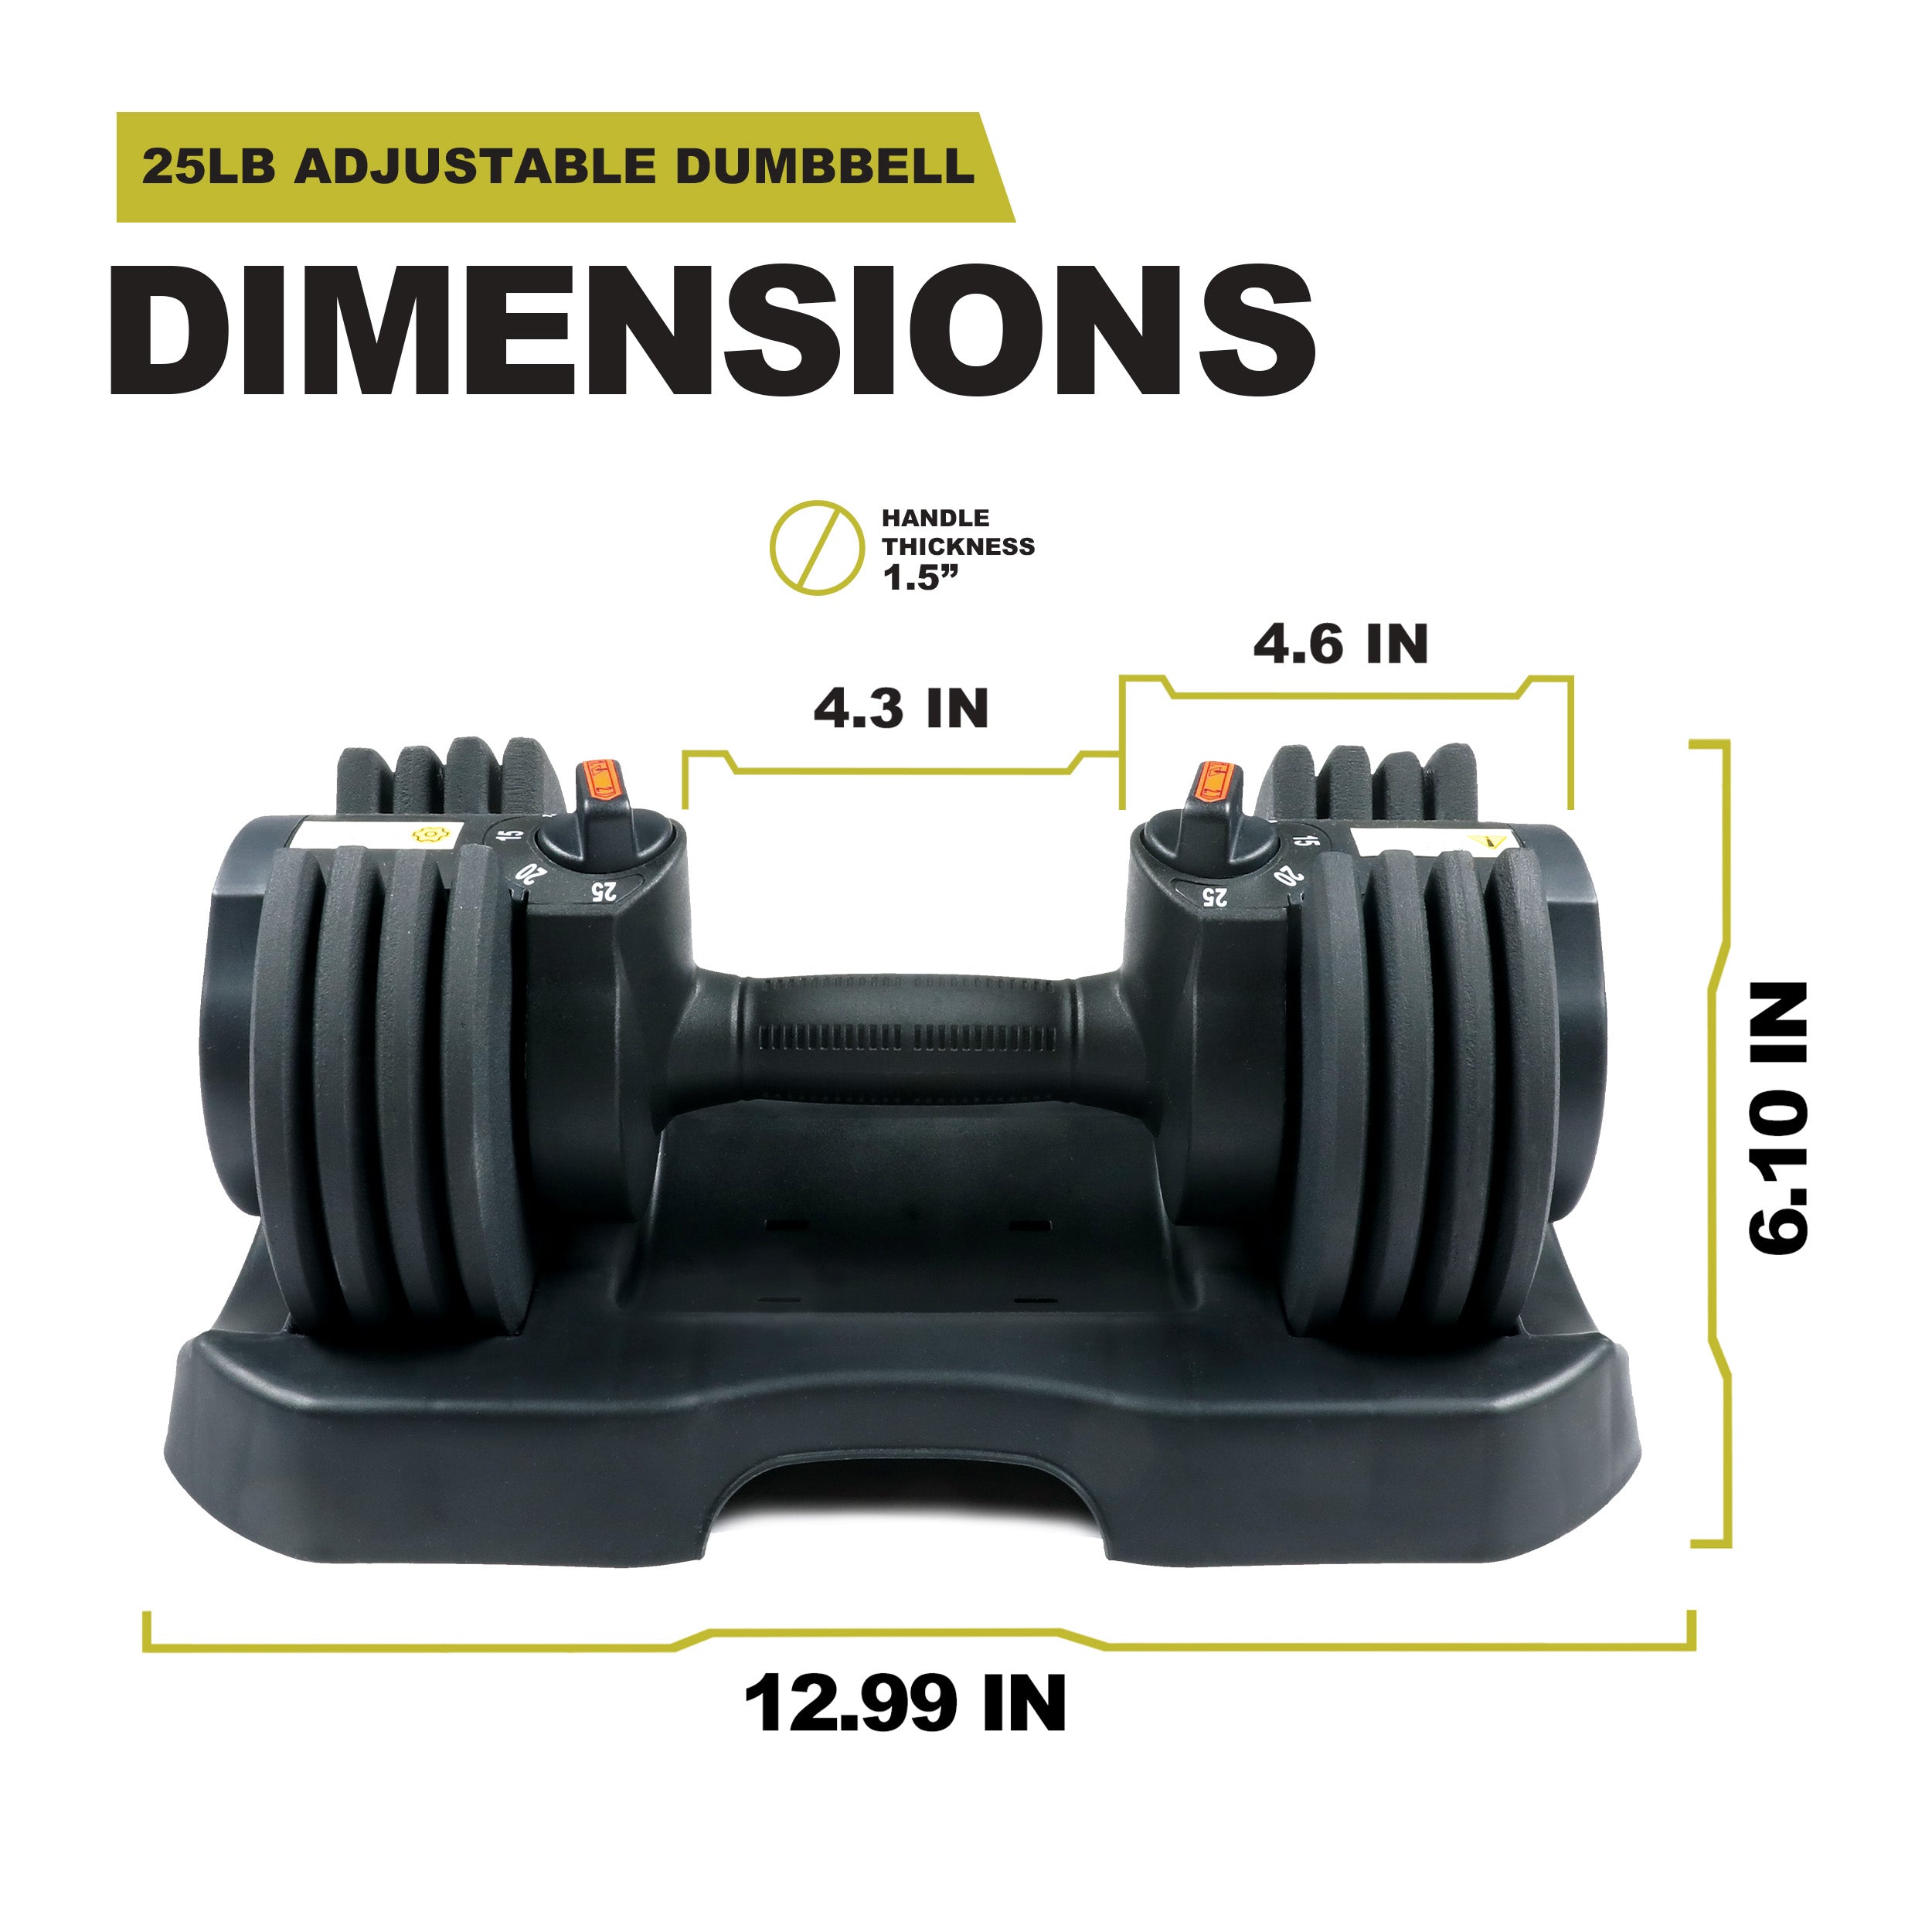 PRCTZ Adjustable Dumbbell Single, Available in 25lb and 55lb